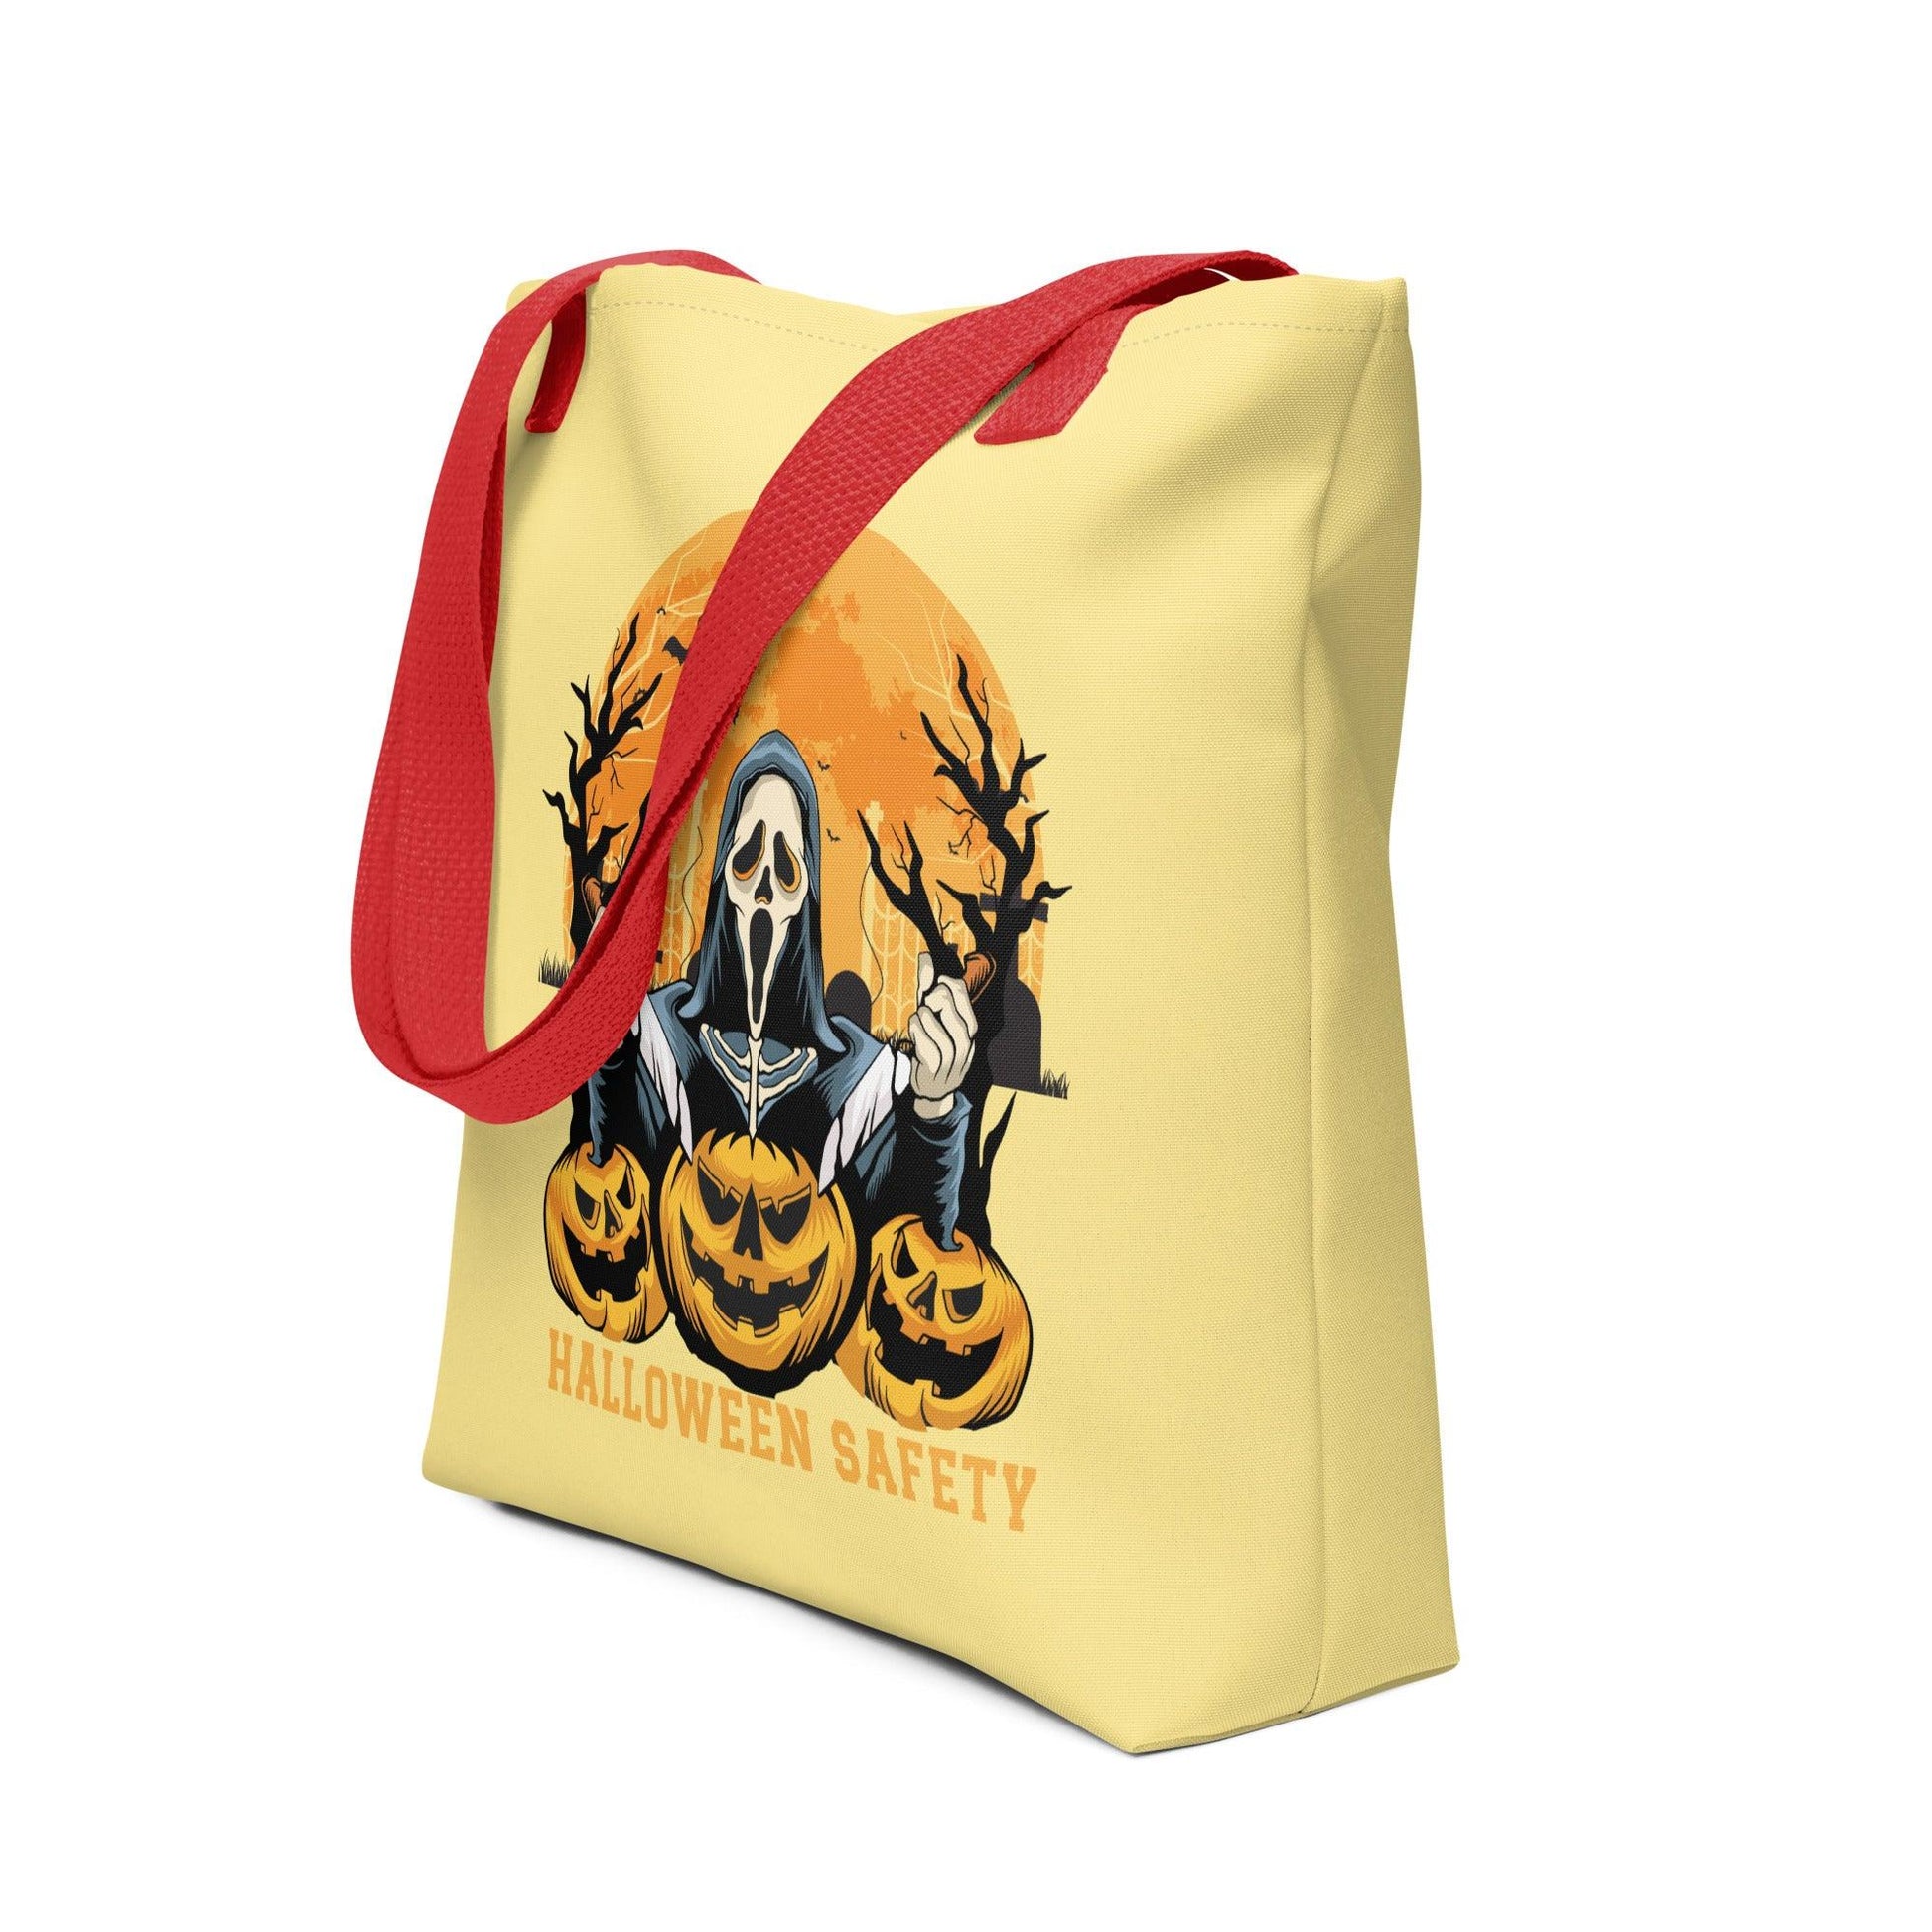 Halloween Safety Trick or Treat Tote bag - L & M Kee, LLC